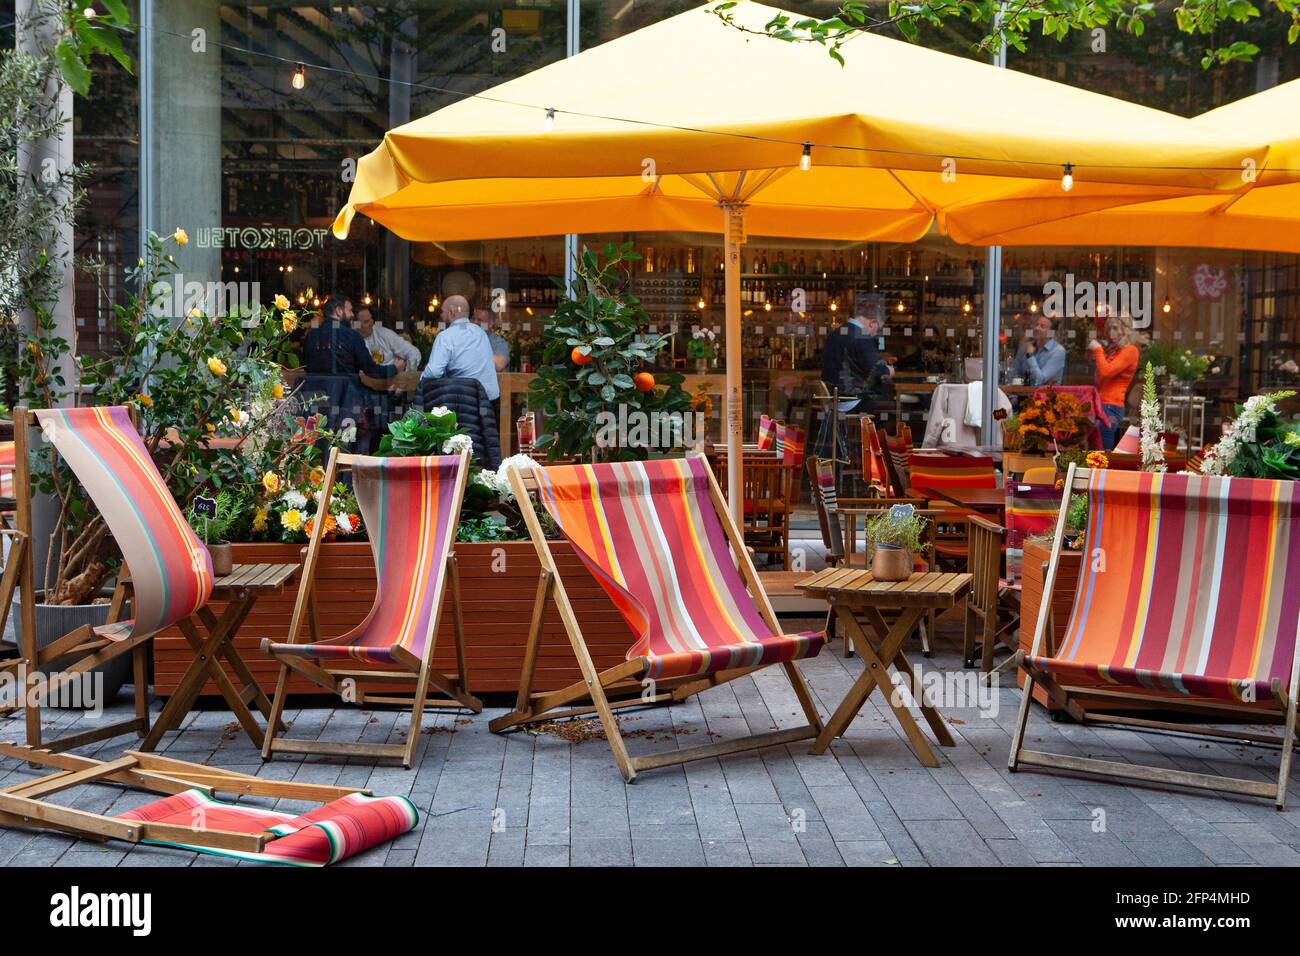 London, UK, 20 May 2021: Windy weather sends deckchairs tumblingat The Refinery restaurantnear the South Bank. But due to the recent relaxation of coronavirus regulations diners are now happily inside, provided they follow the rule of six. Anna Watson/Alamy Live News Stock Photo